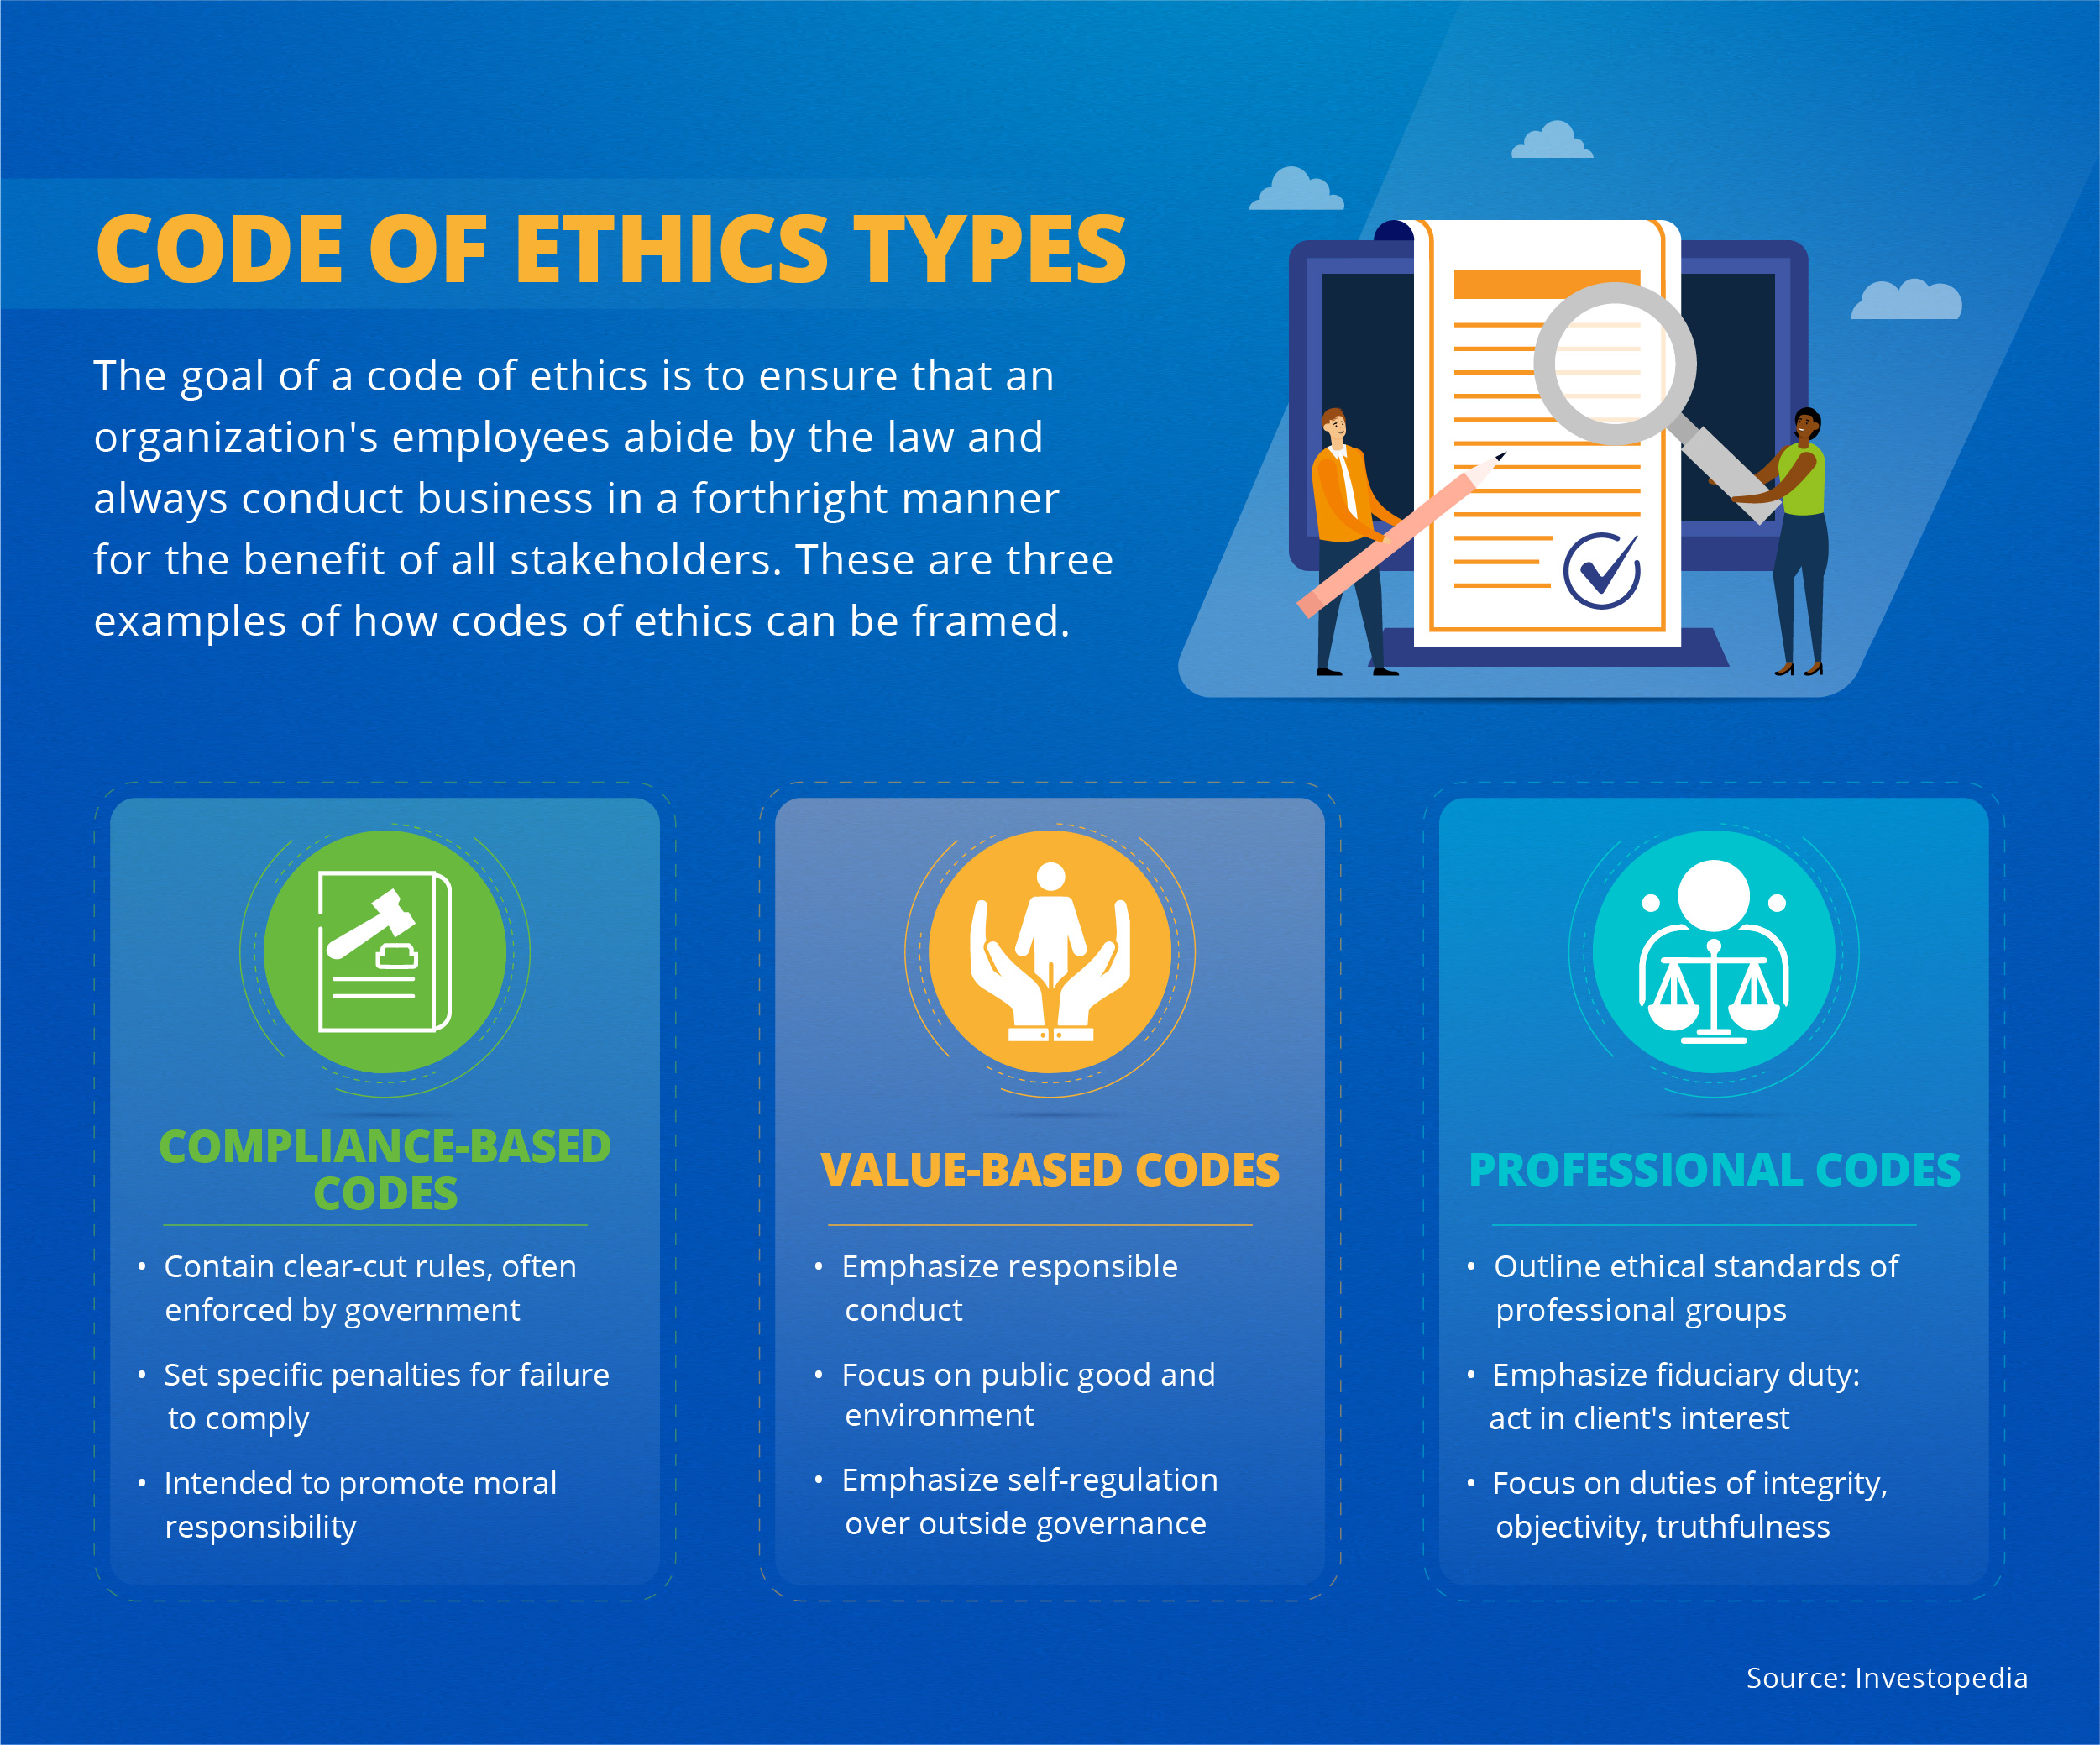 Three types of ethics codes: compliance-based, values-based, and professional.